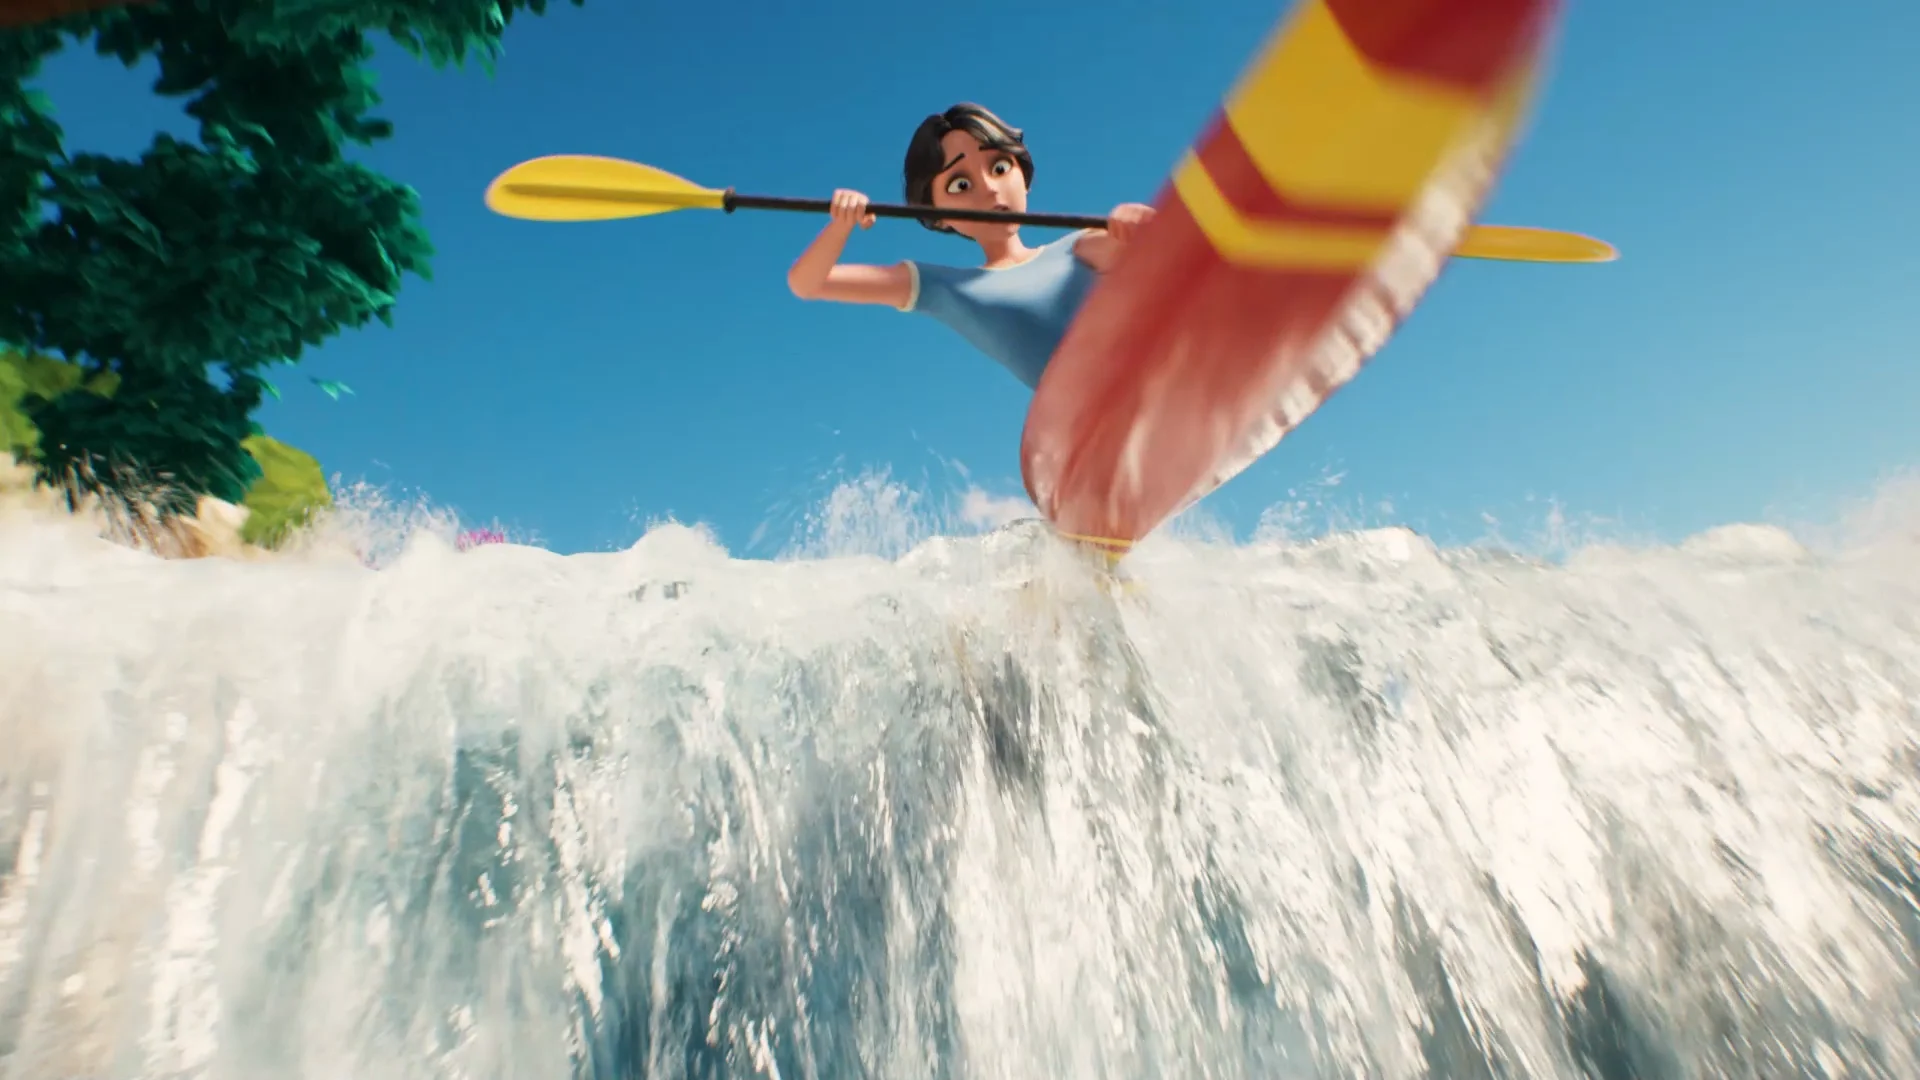 a cartoonish looking girl with brown hair and a blue in a canoe is falling down a waterfall